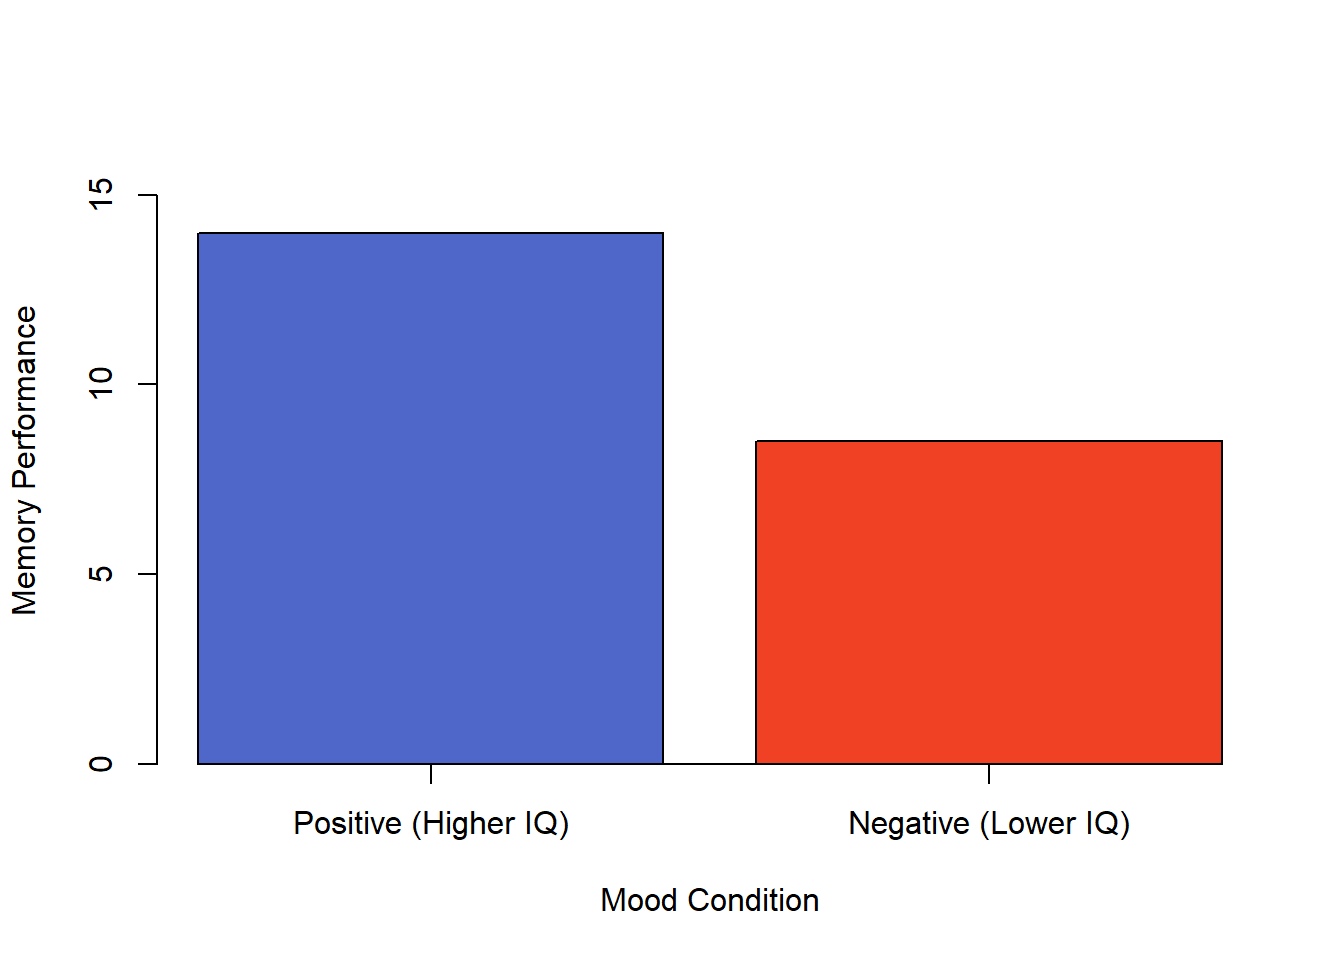 Hypothetical results from a study on the effect of mood on memory. Because IQ also differs across conditions, it is a confounding variable.